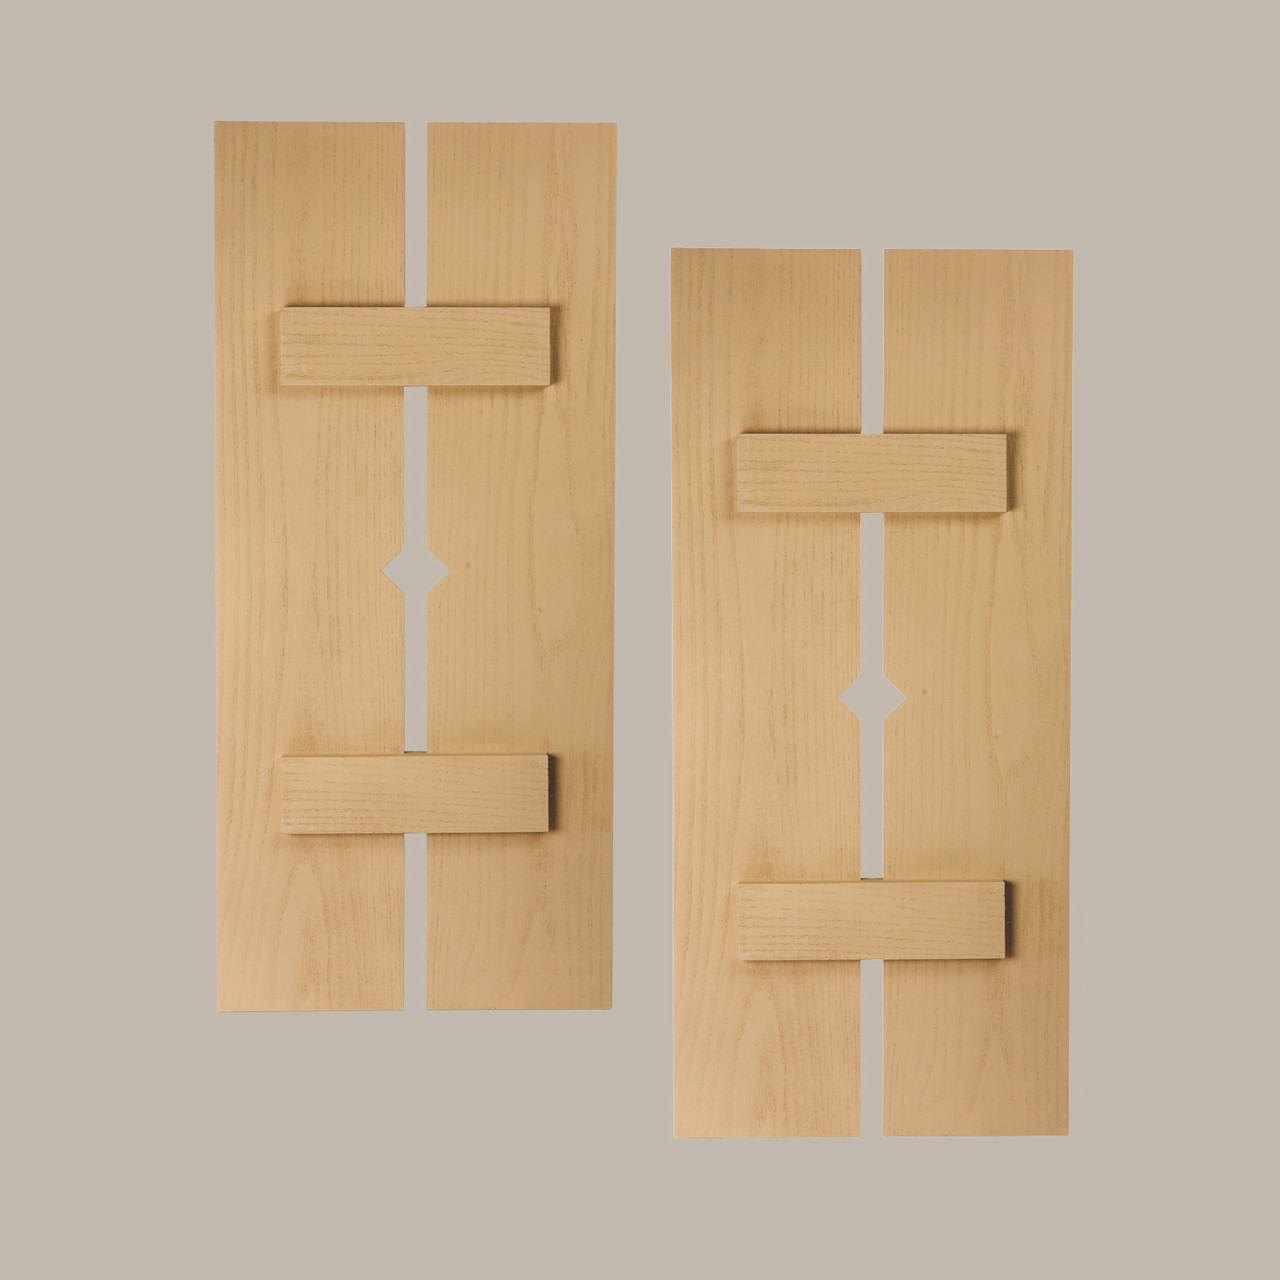 12 inch by 81 inch Plank Shutter with 2-Plank, Diamond